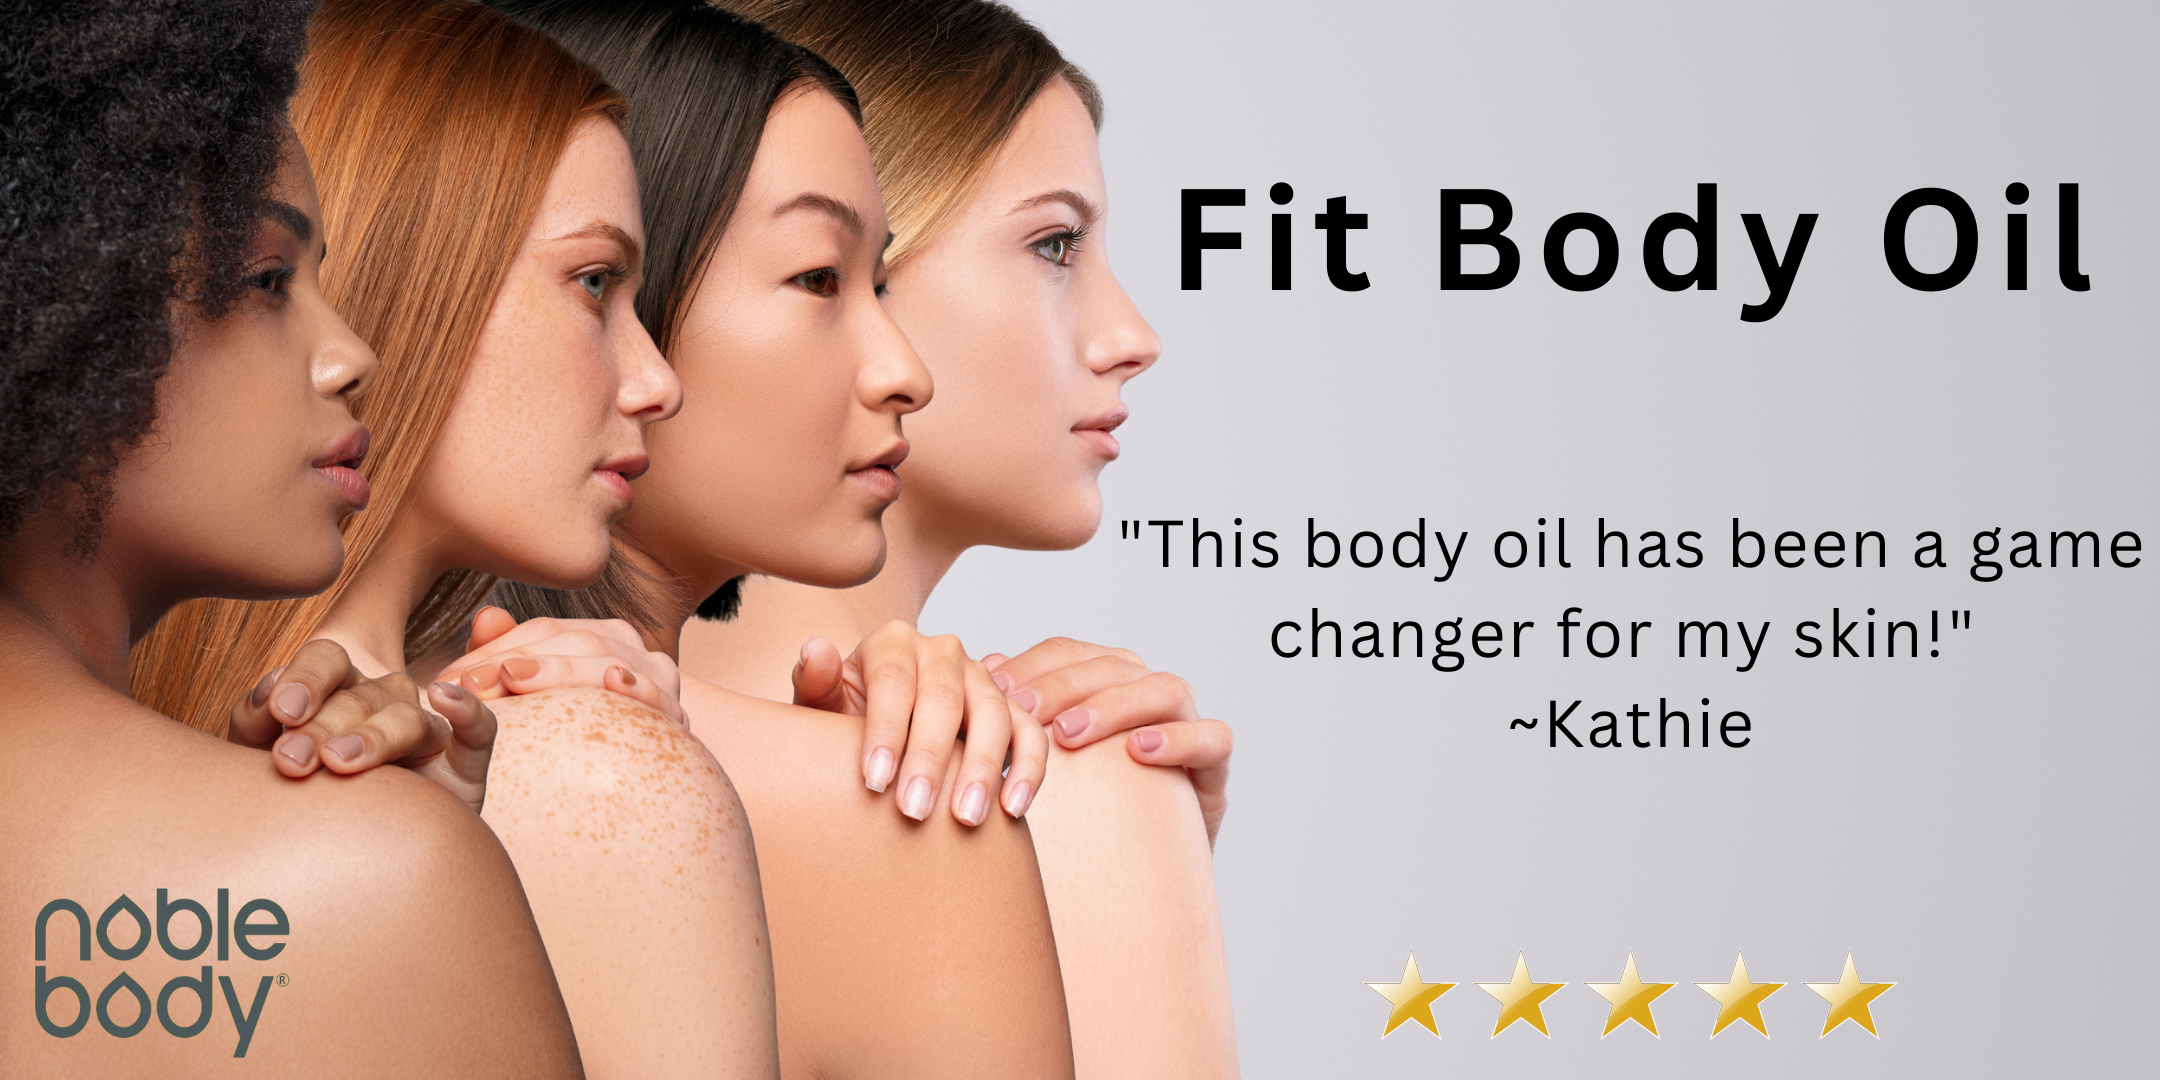 Closeup of 4 beautiful women on left side of photo looking to their right all with bare shoulders. Caption reads "fit body oil" and a review that states "this body oil has been a game changer for my skin!"